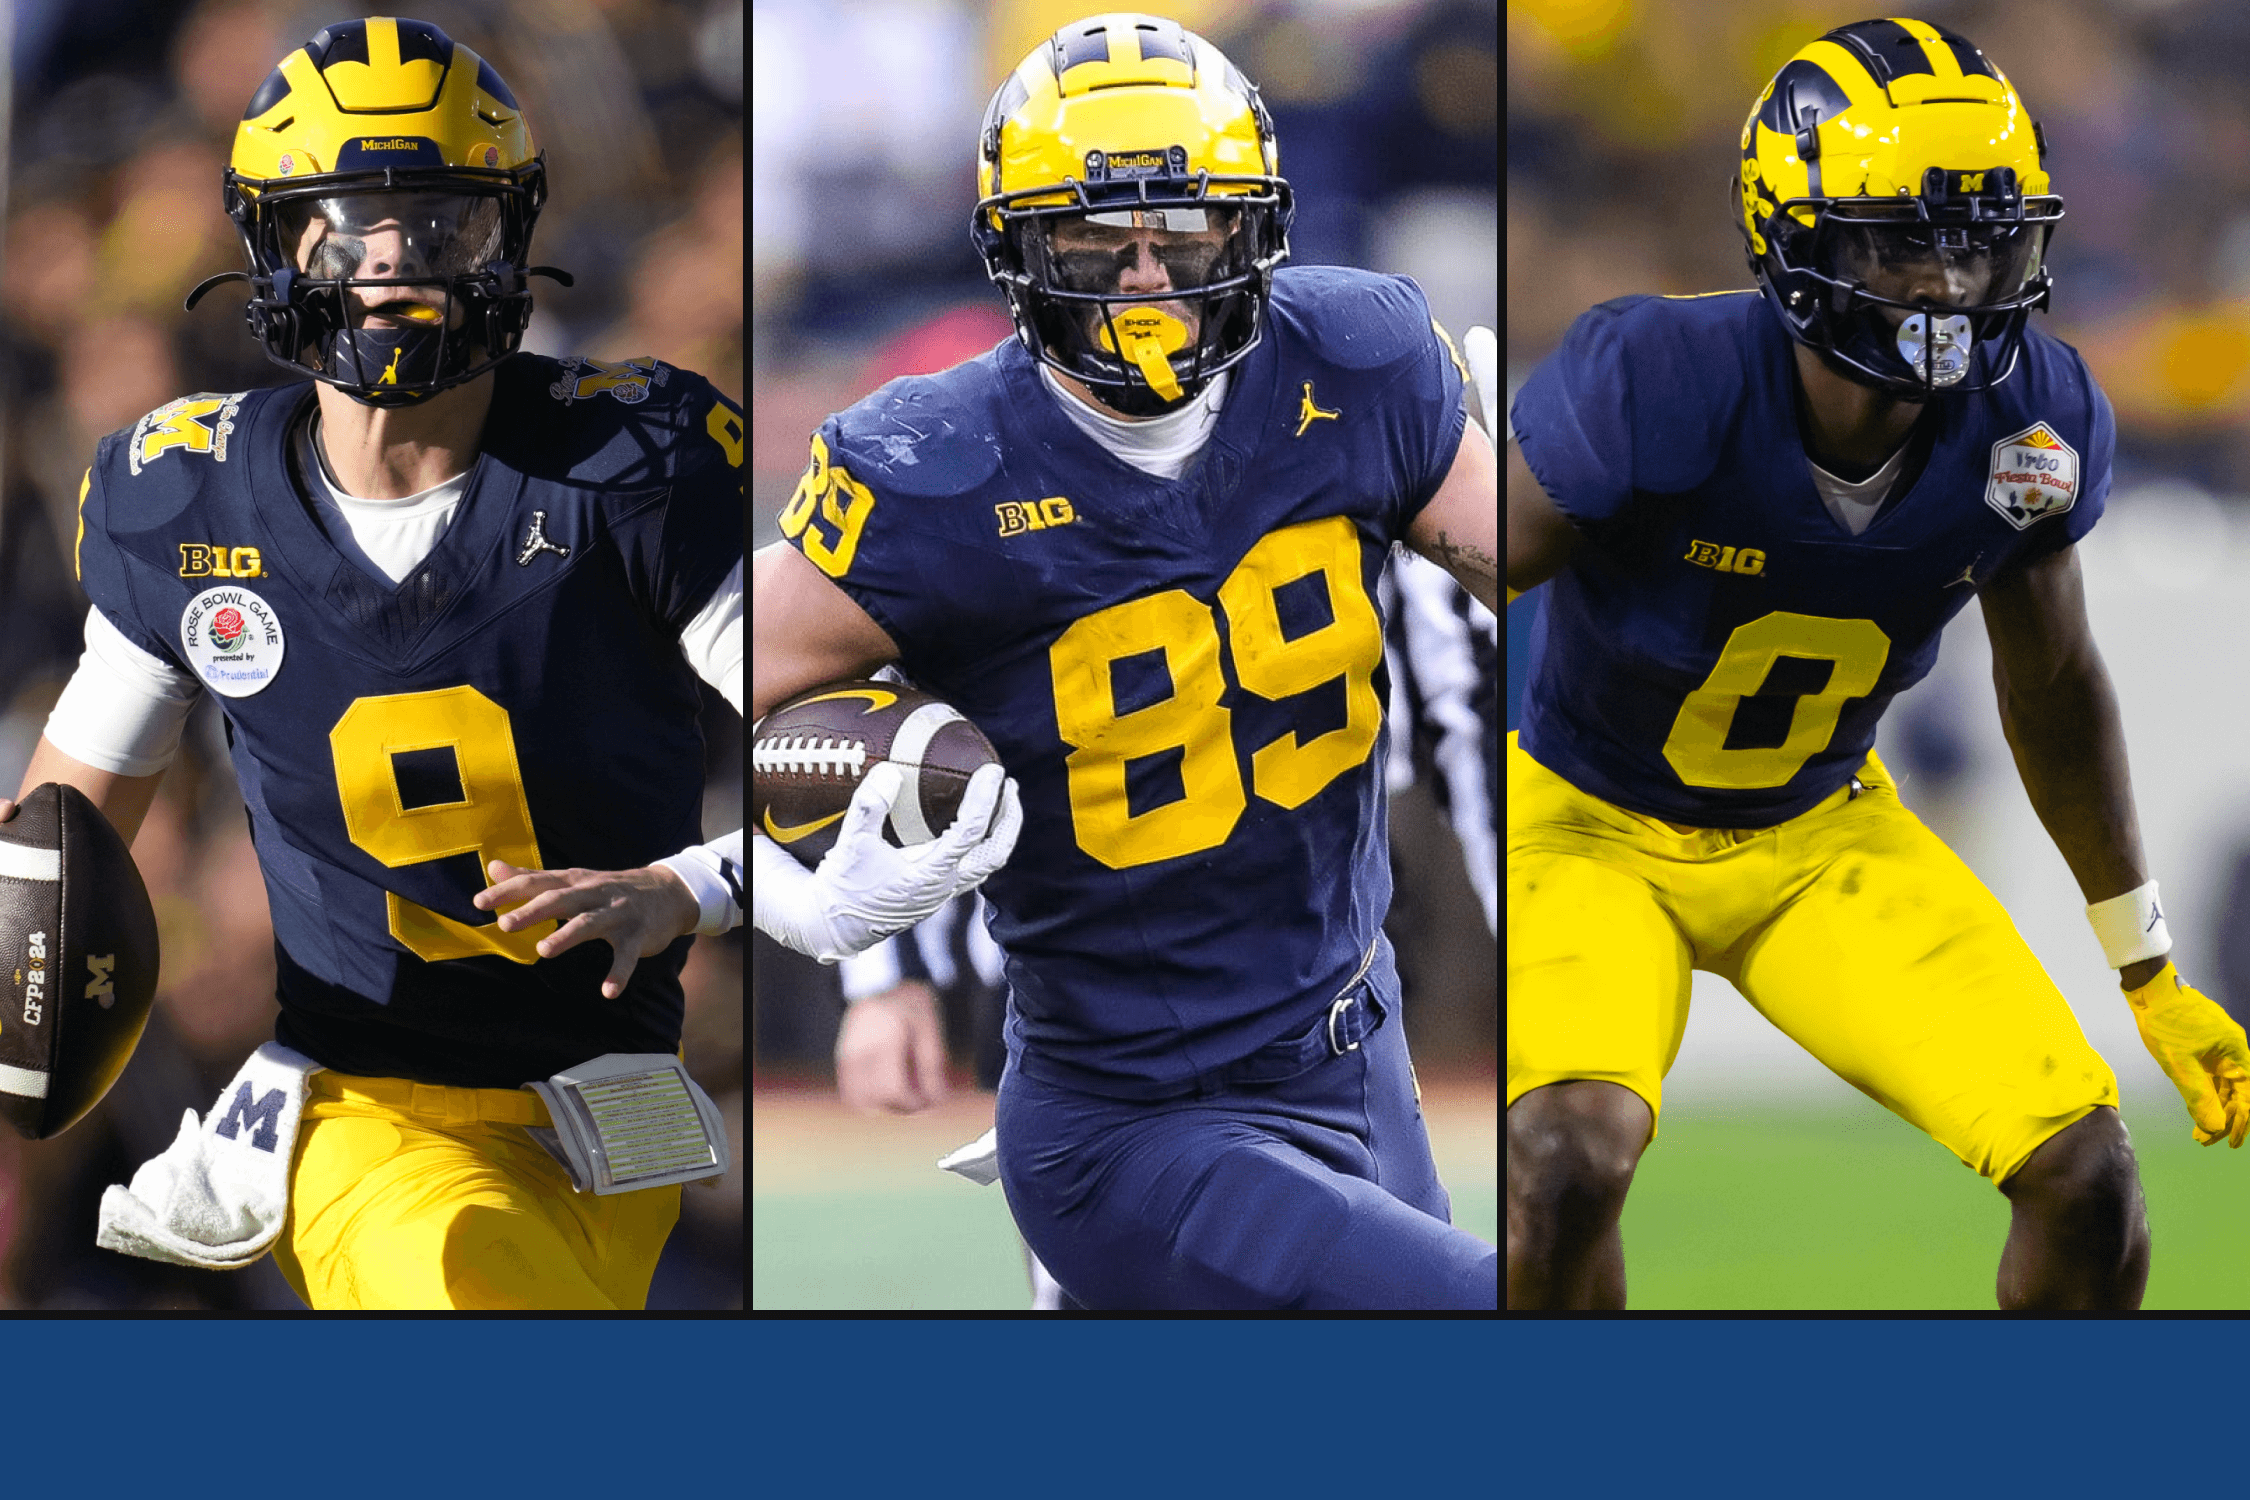 Can Michigan break record for most players drafted? Debating the Wolverines’ draft class